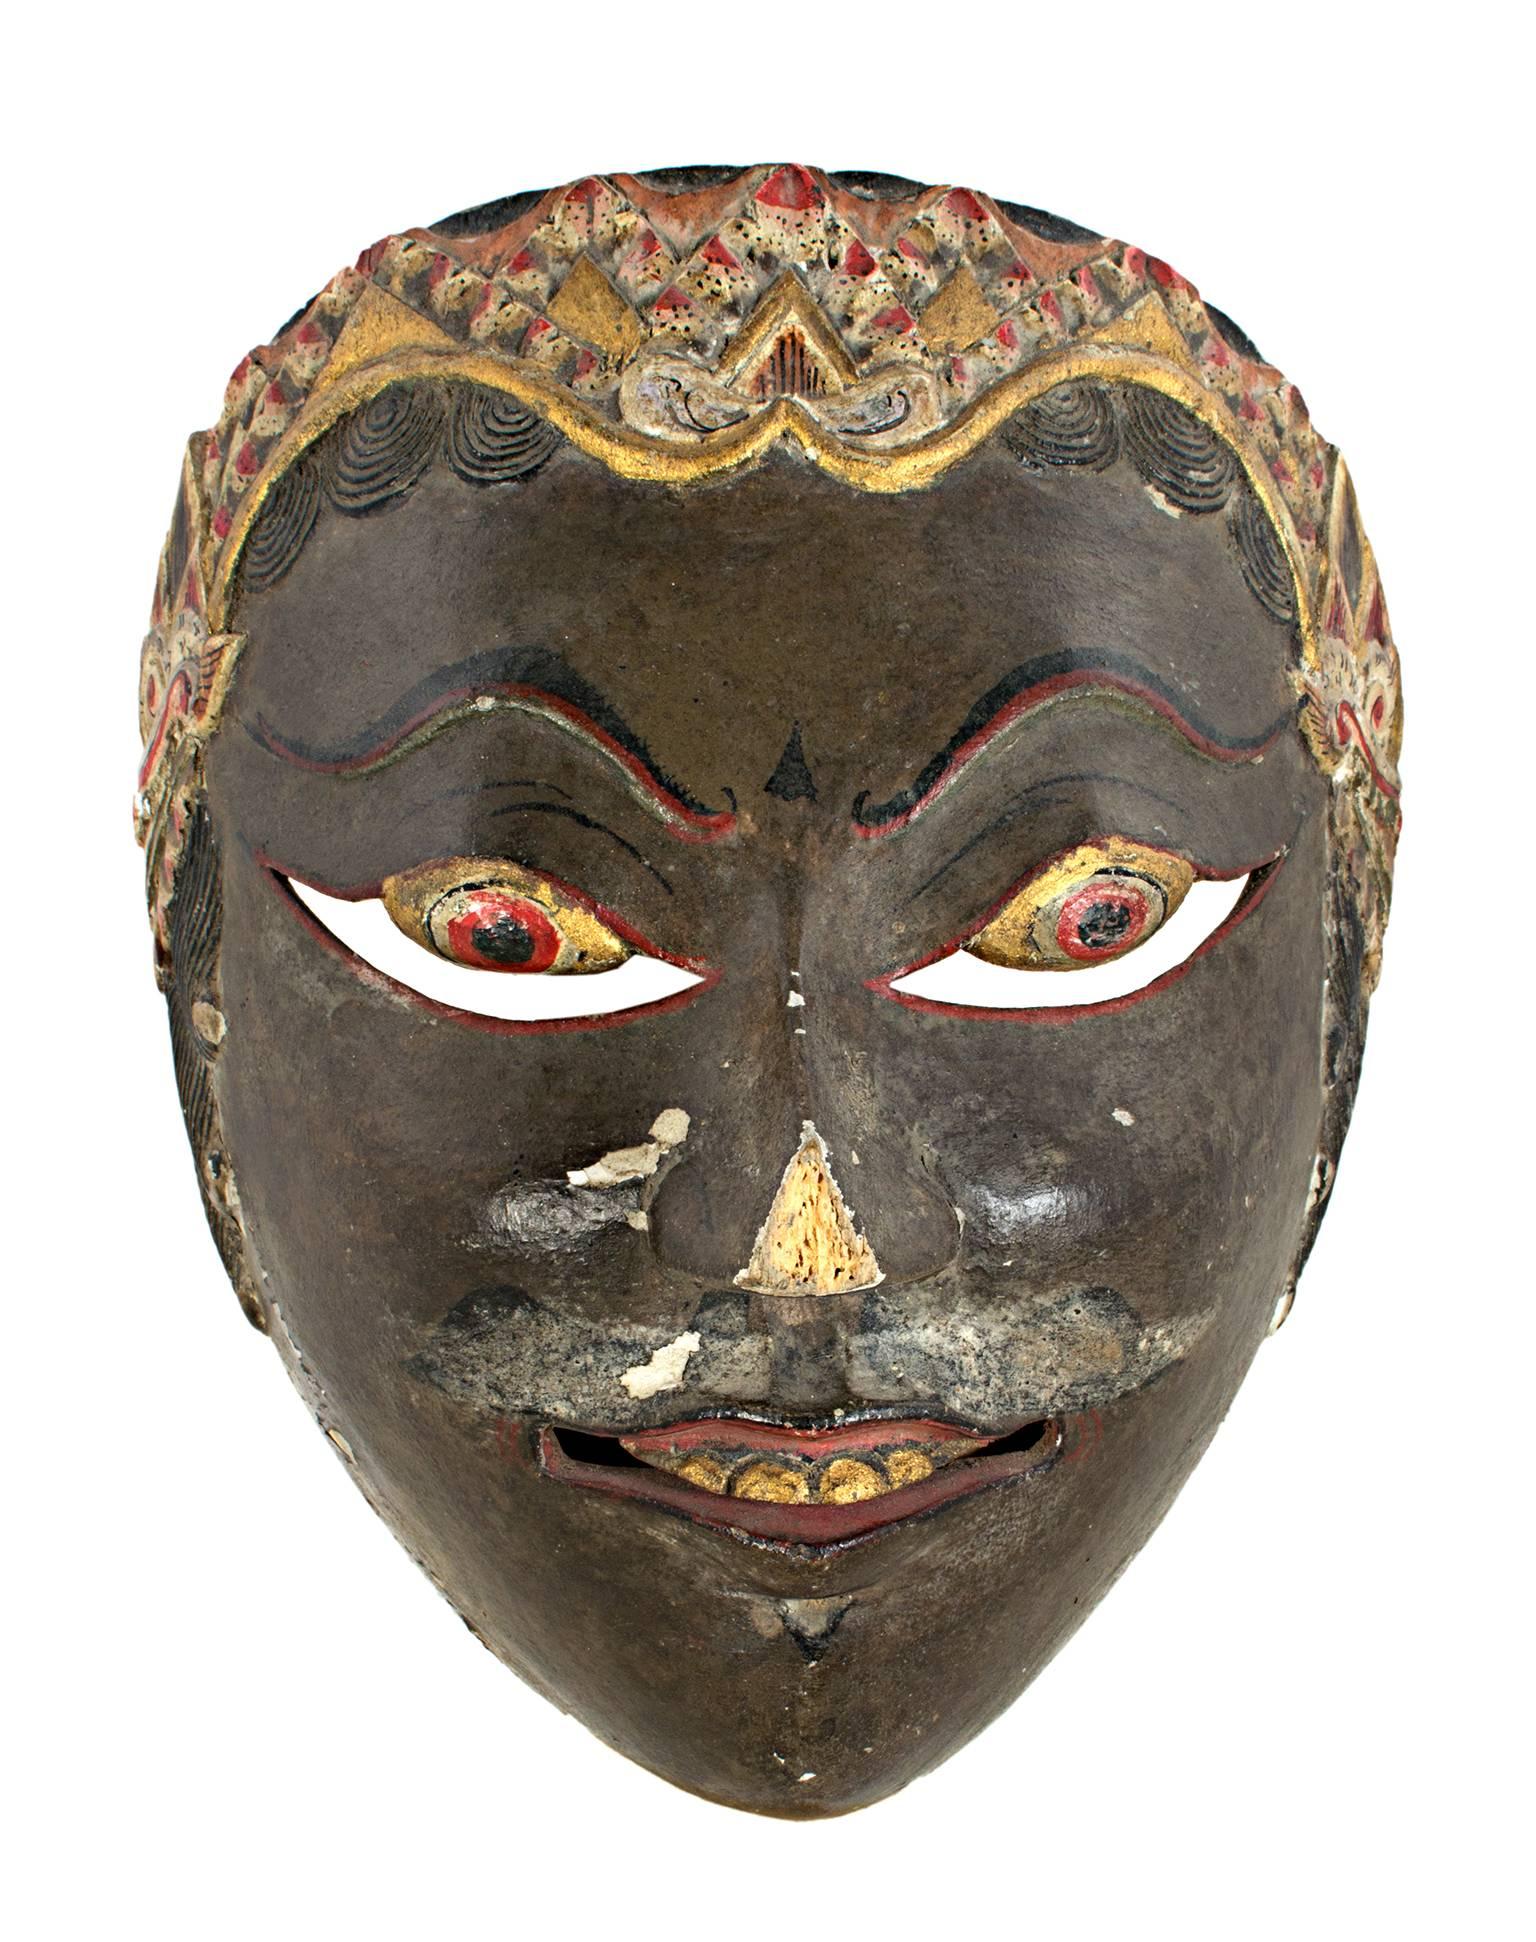 Unknown Figurative Sculpture - "Indonesian Mask with Dark Face and Gold Accents, " Painted Wood 19th Century